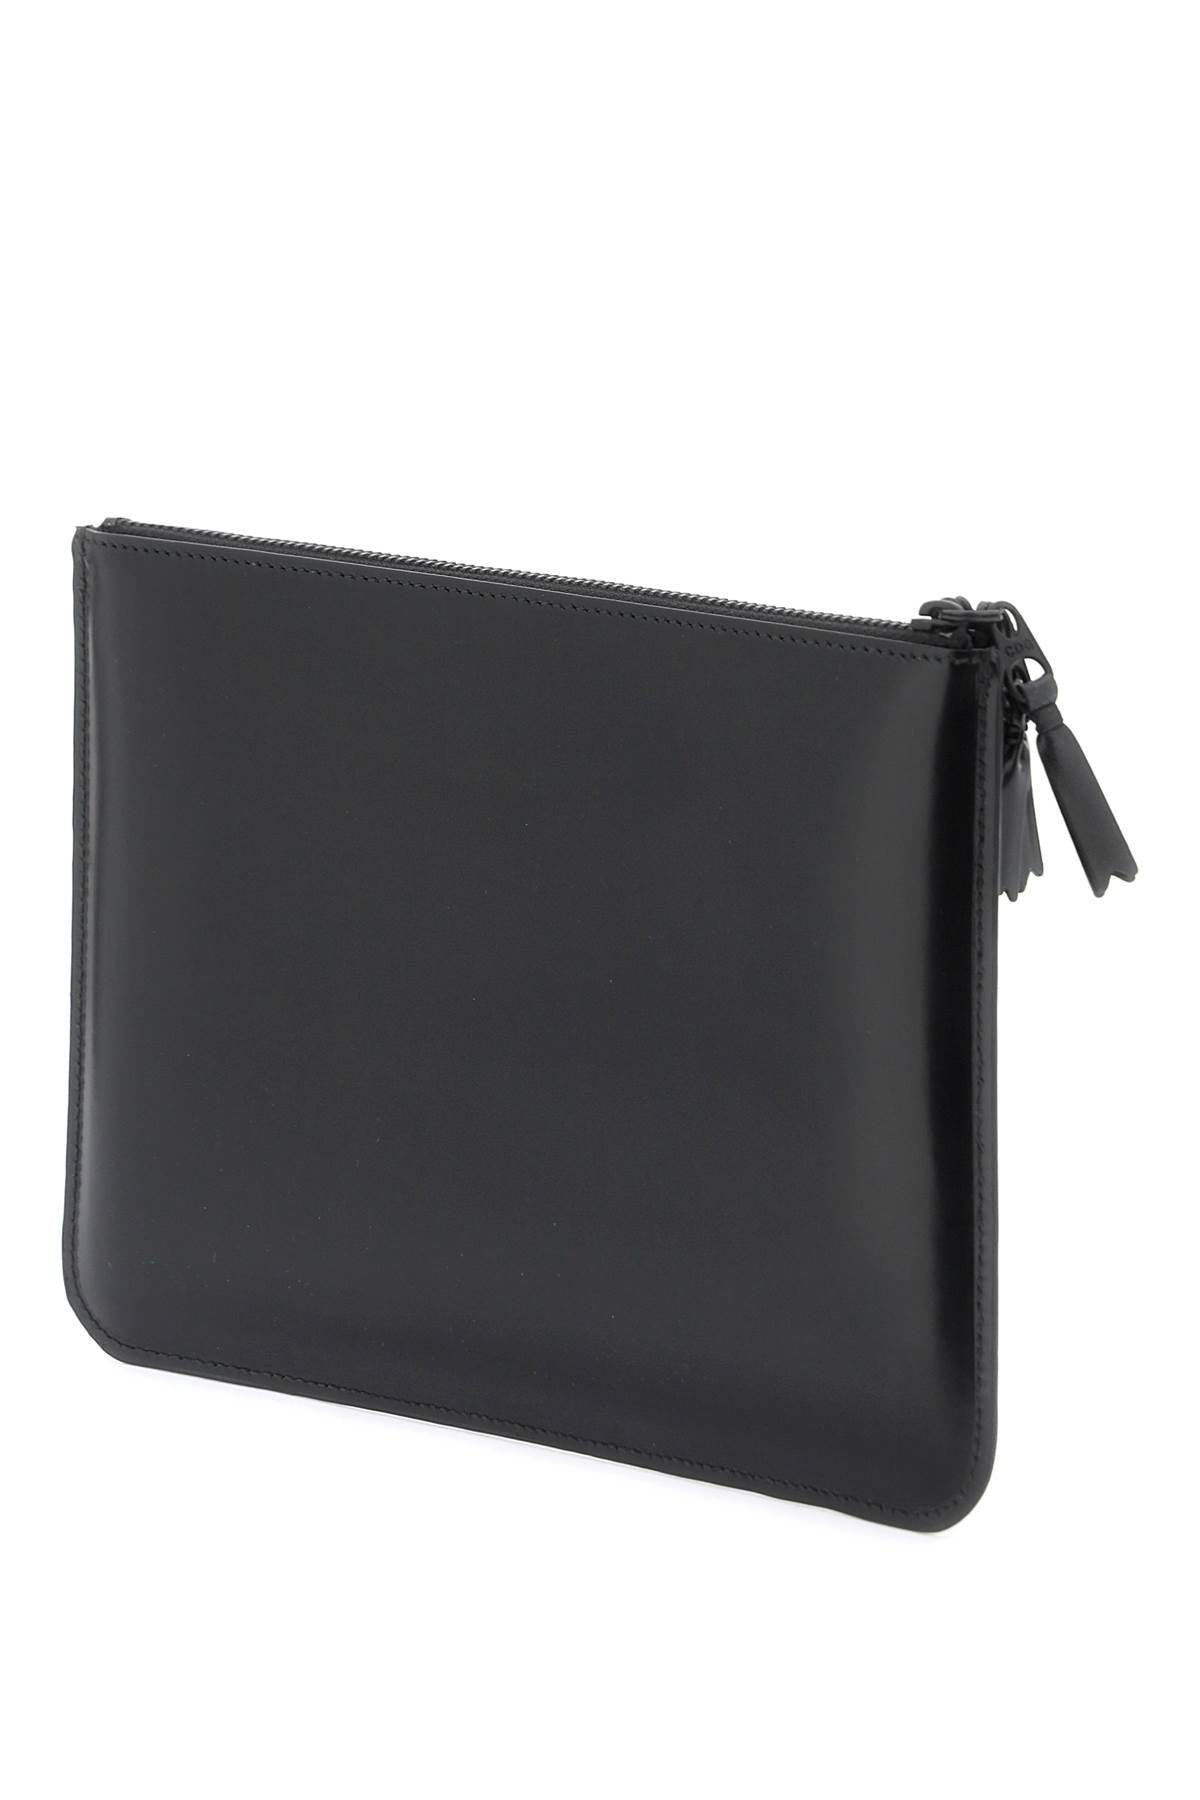 Comme des garcons wallet brushed leather multi-zip pouch with-1